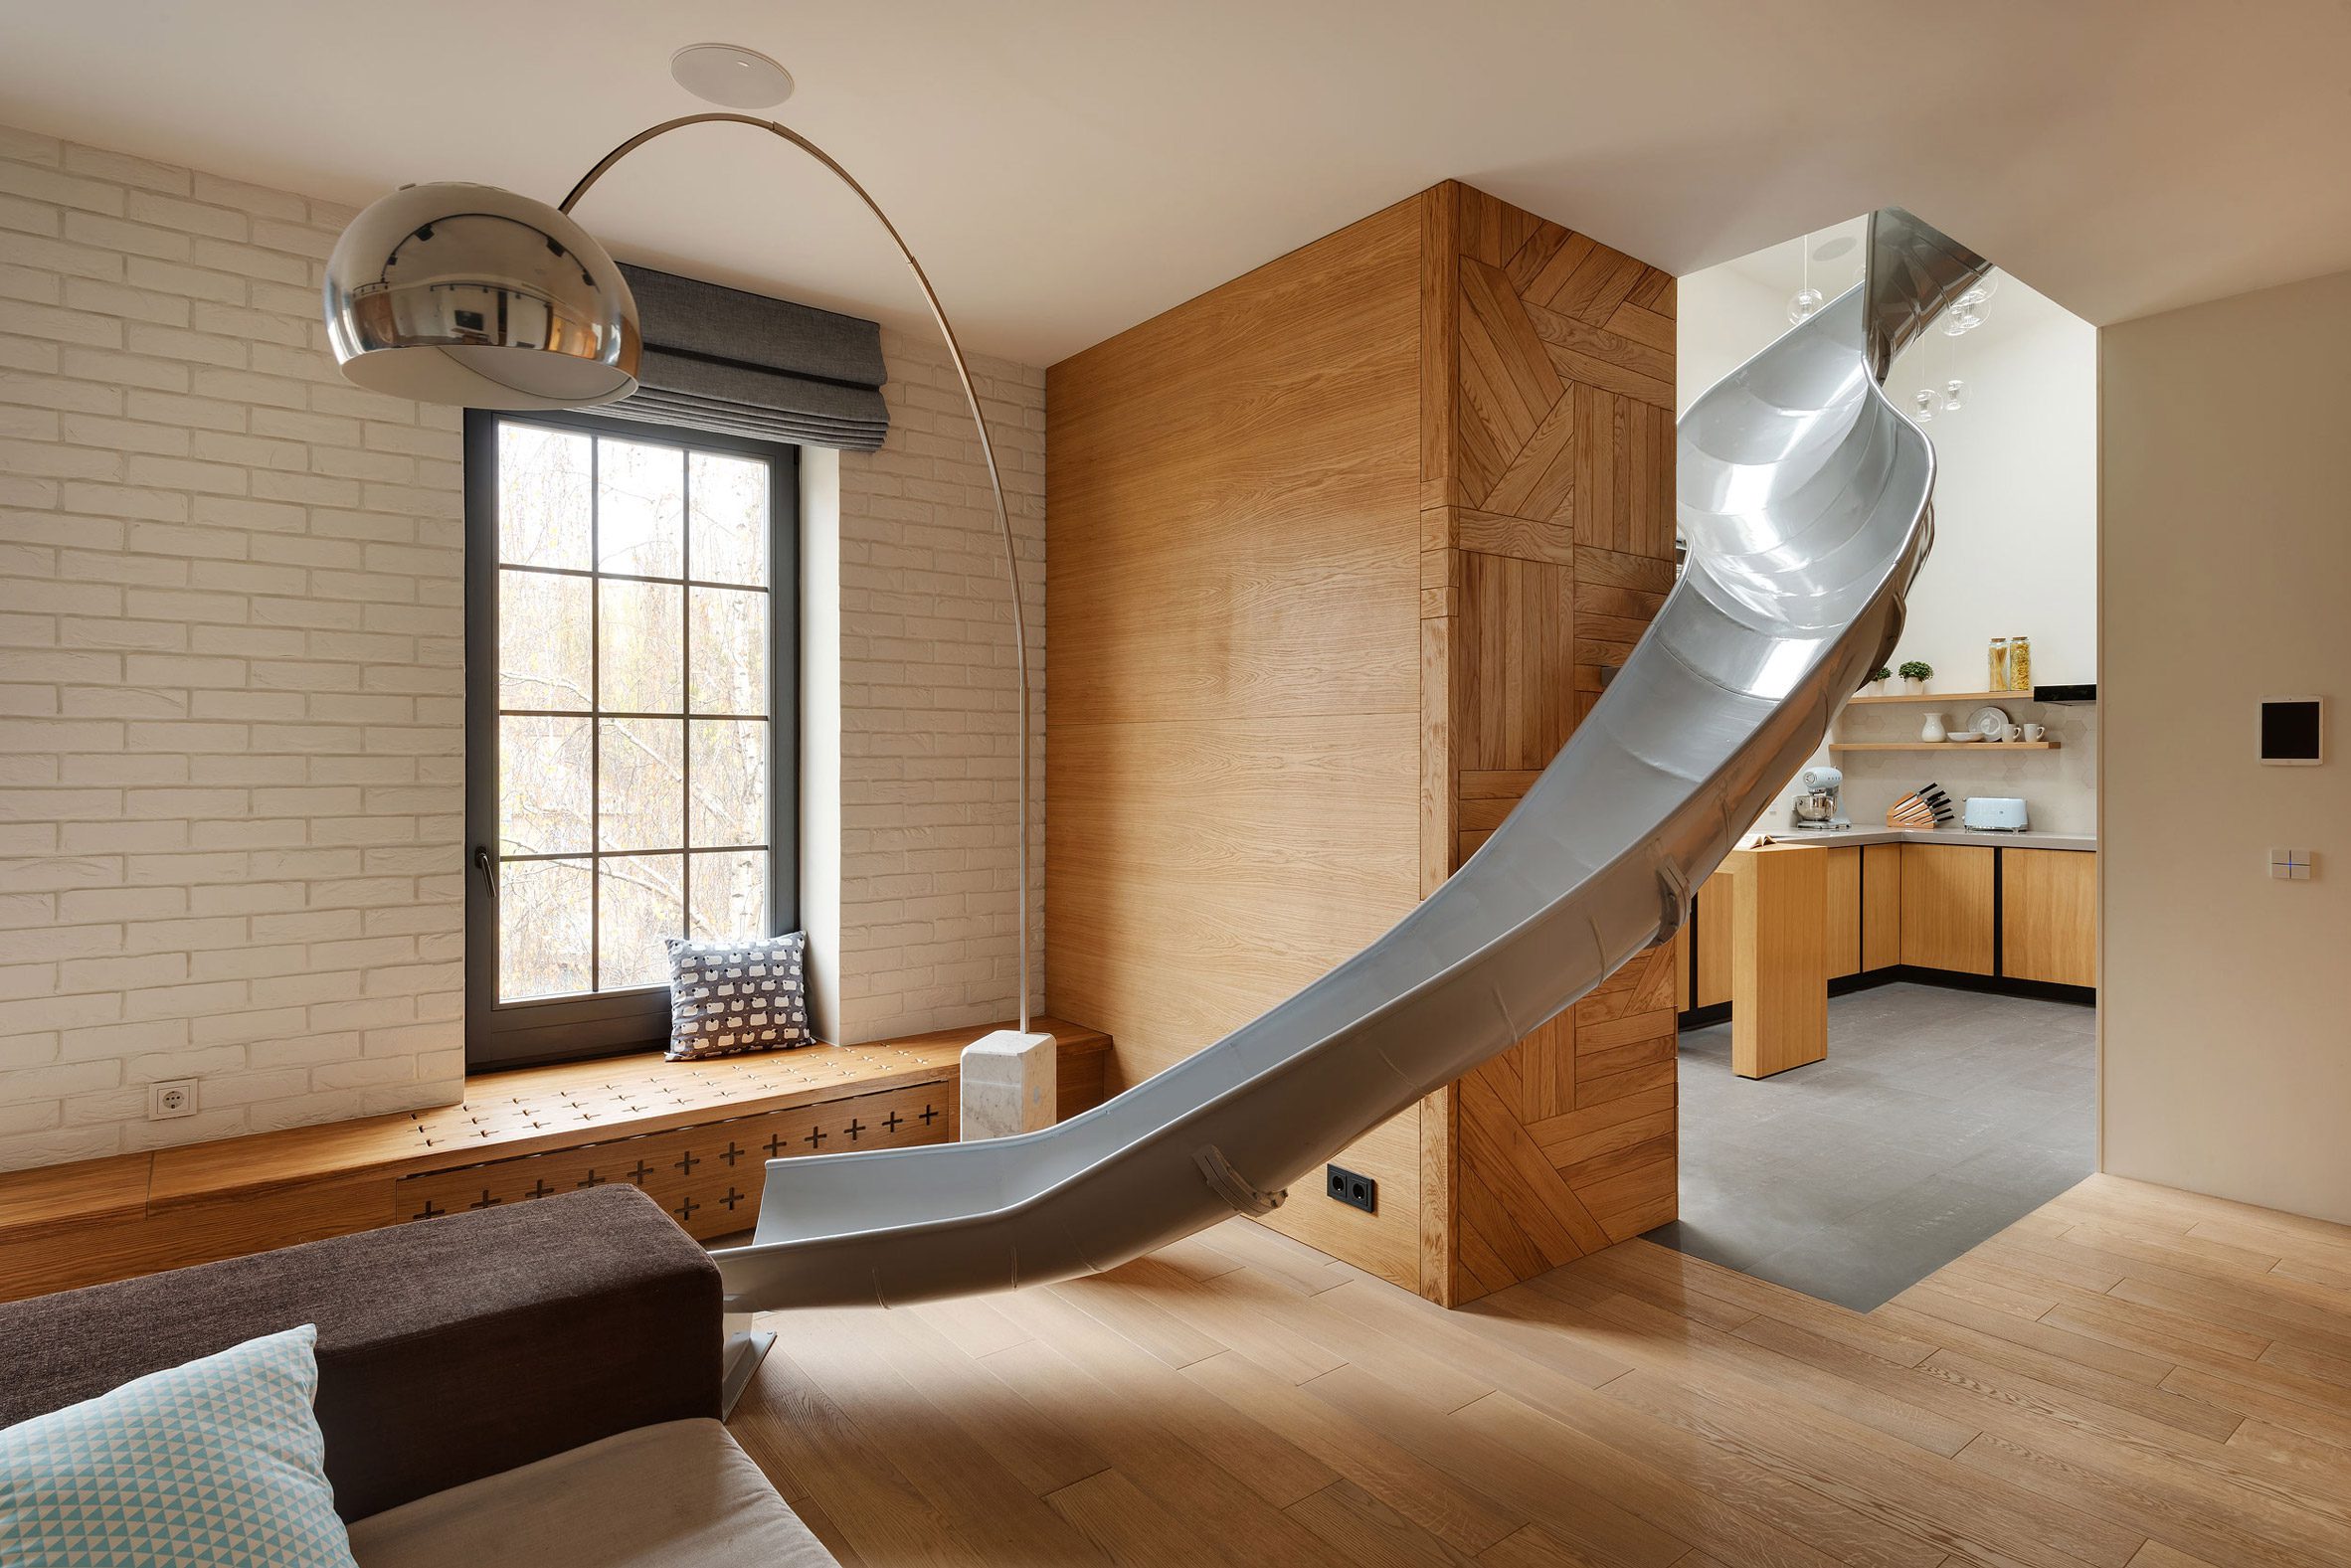 Apartment with a slide in Kyiv